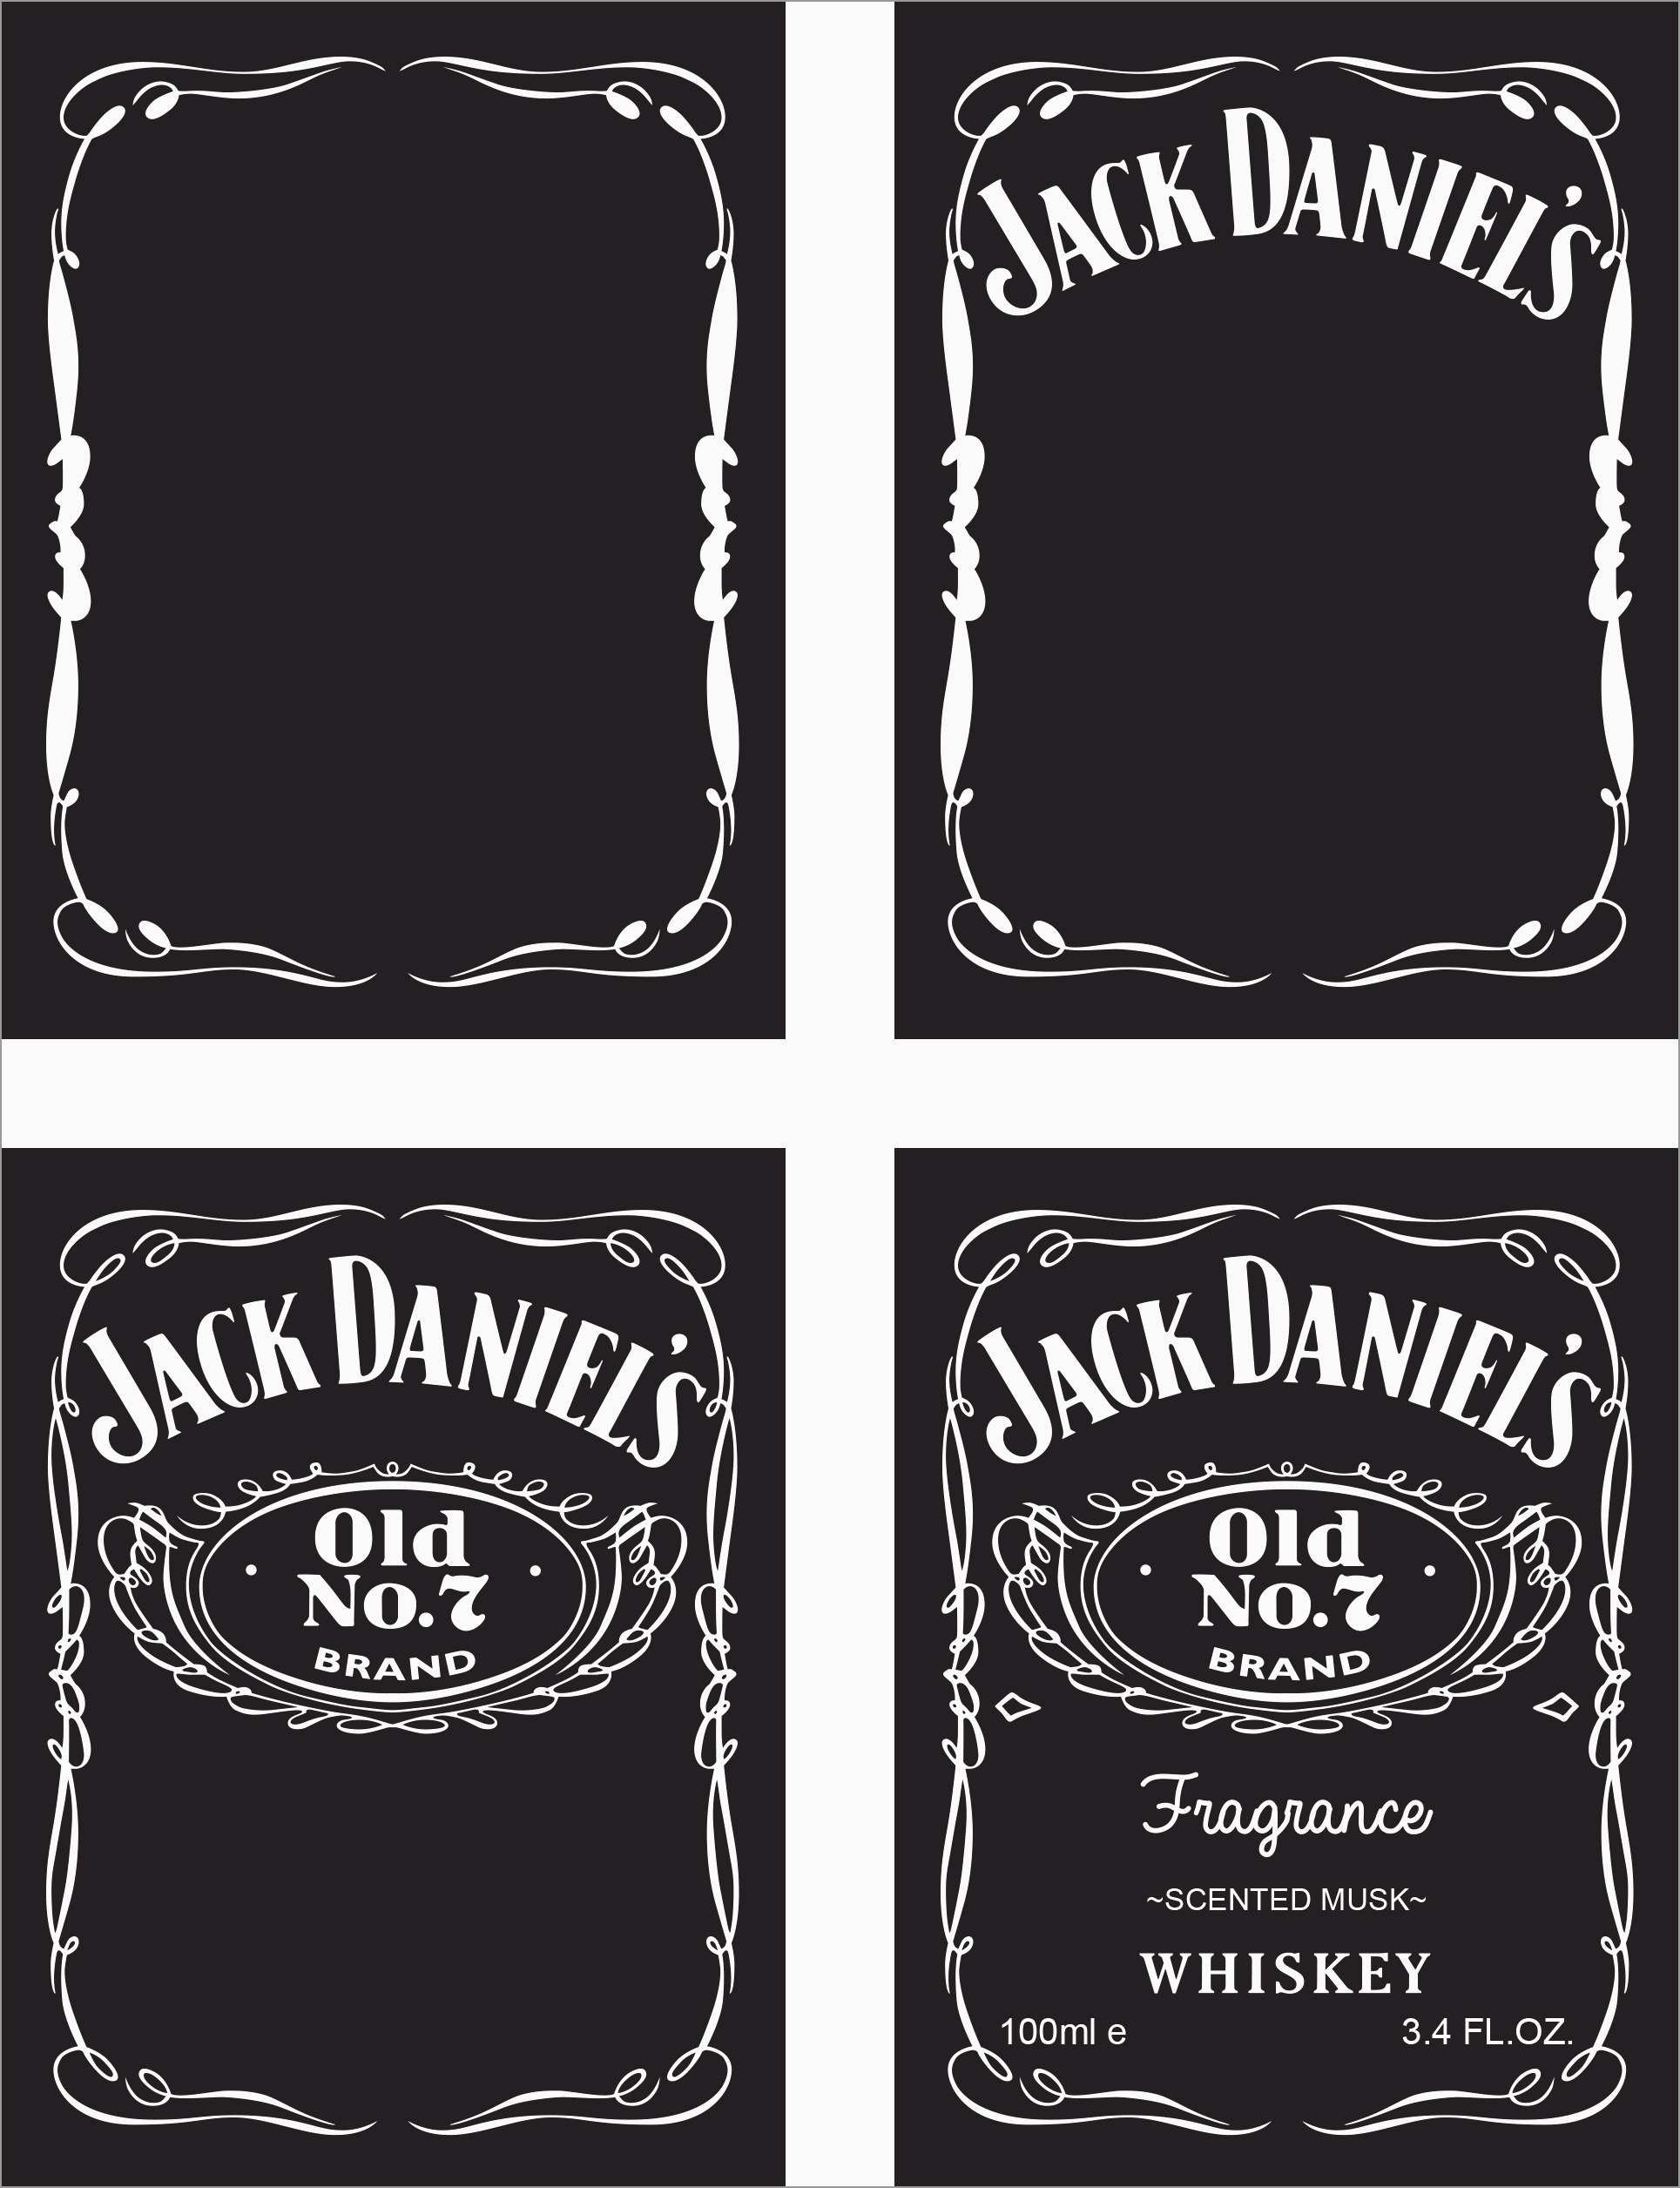 Lovely Jack Daniels Invitation Template Free  Best Of Template within Blank Jack Daniels Label Template